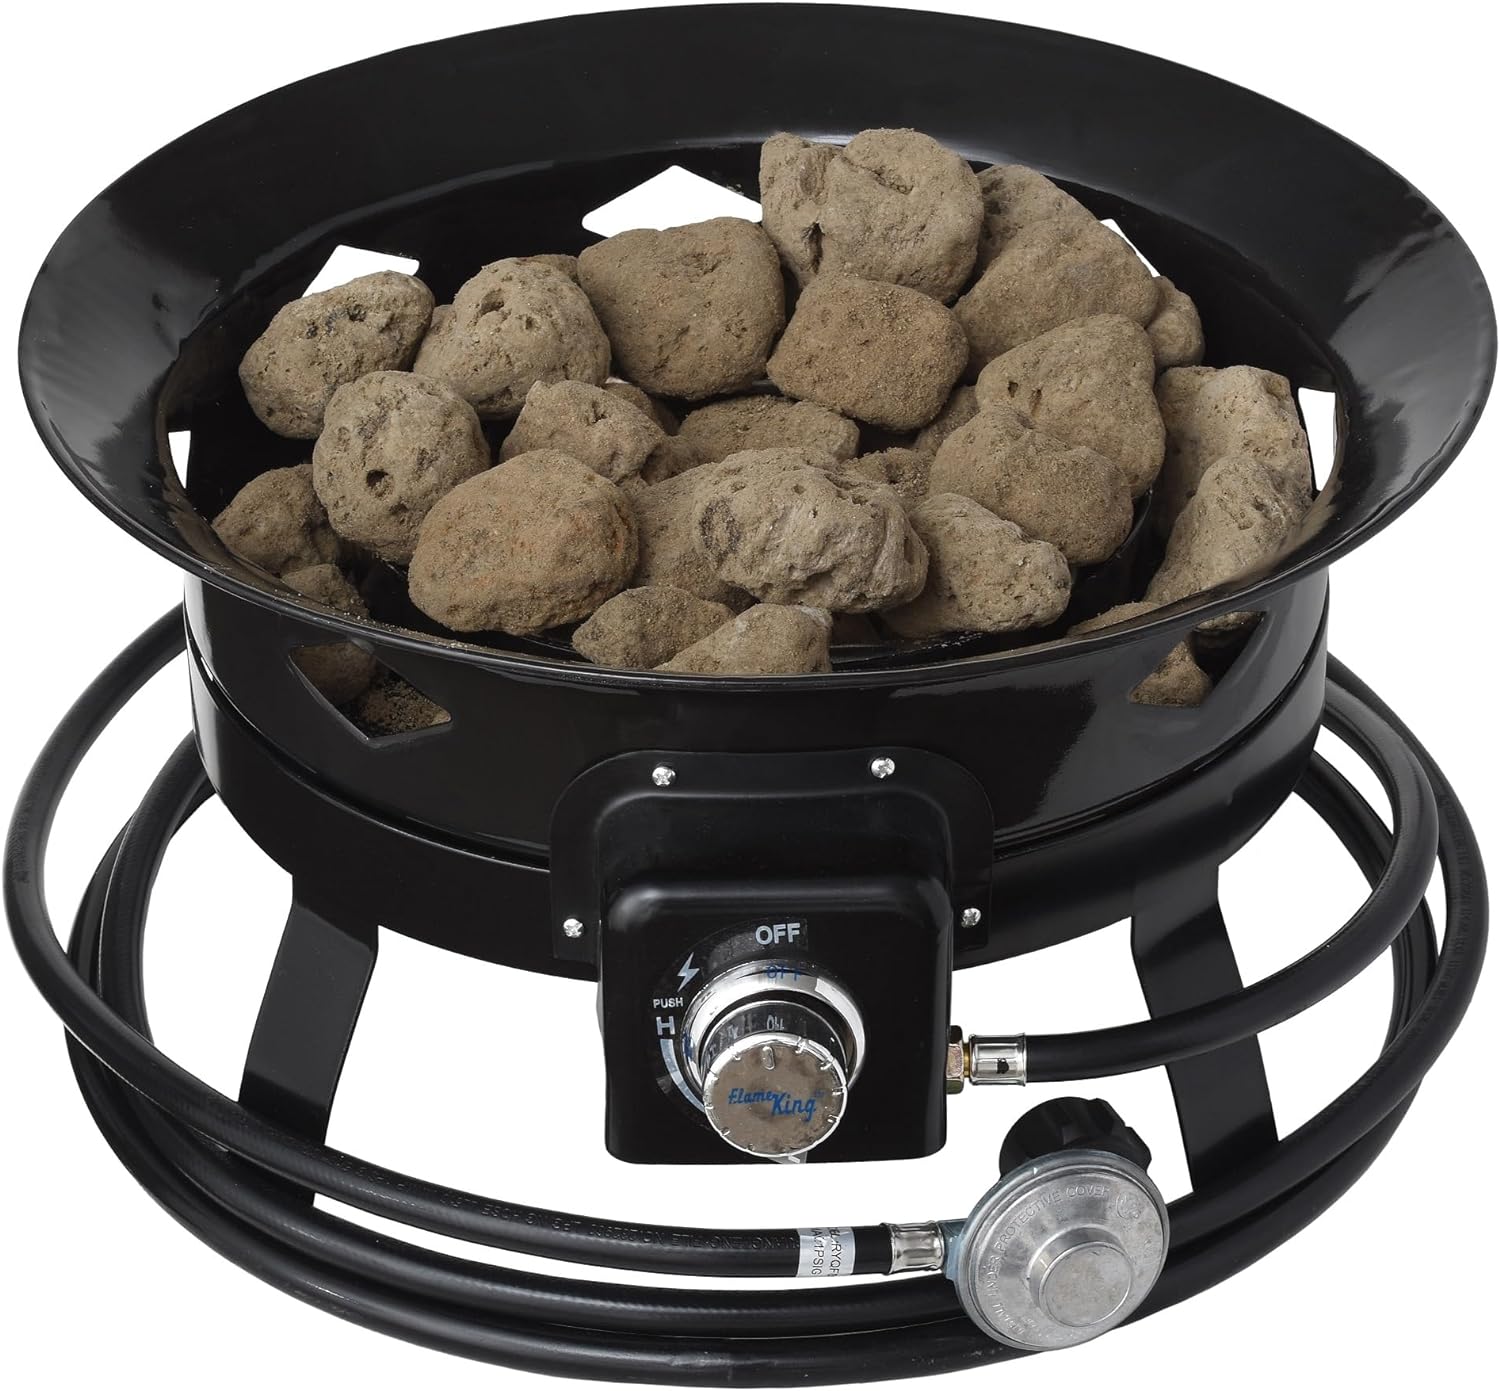 Flame King 19-inch Smokeless Propane Fire Pit with Self Igniter, Cover, & Carry Straps - Ideal for RV, Camping, & Outdoor Living